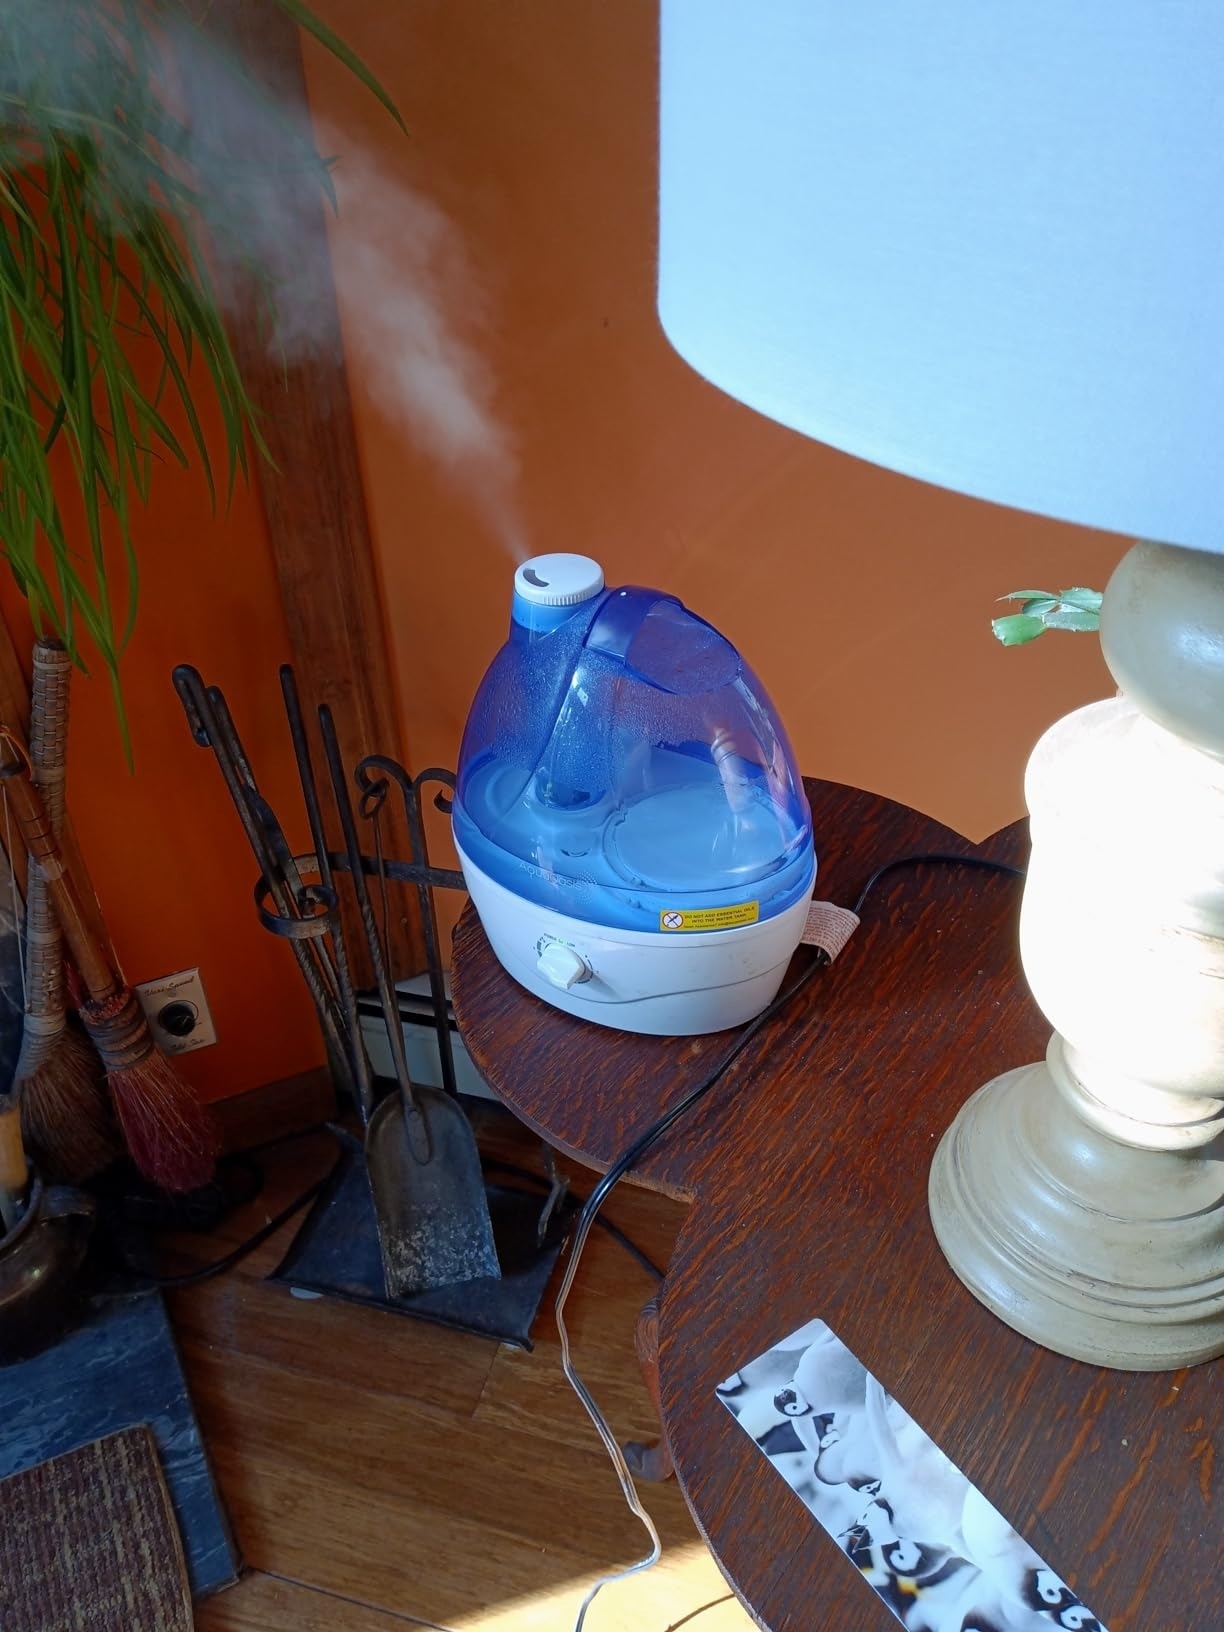 A humidifier operating next to a lamp and indoor plants